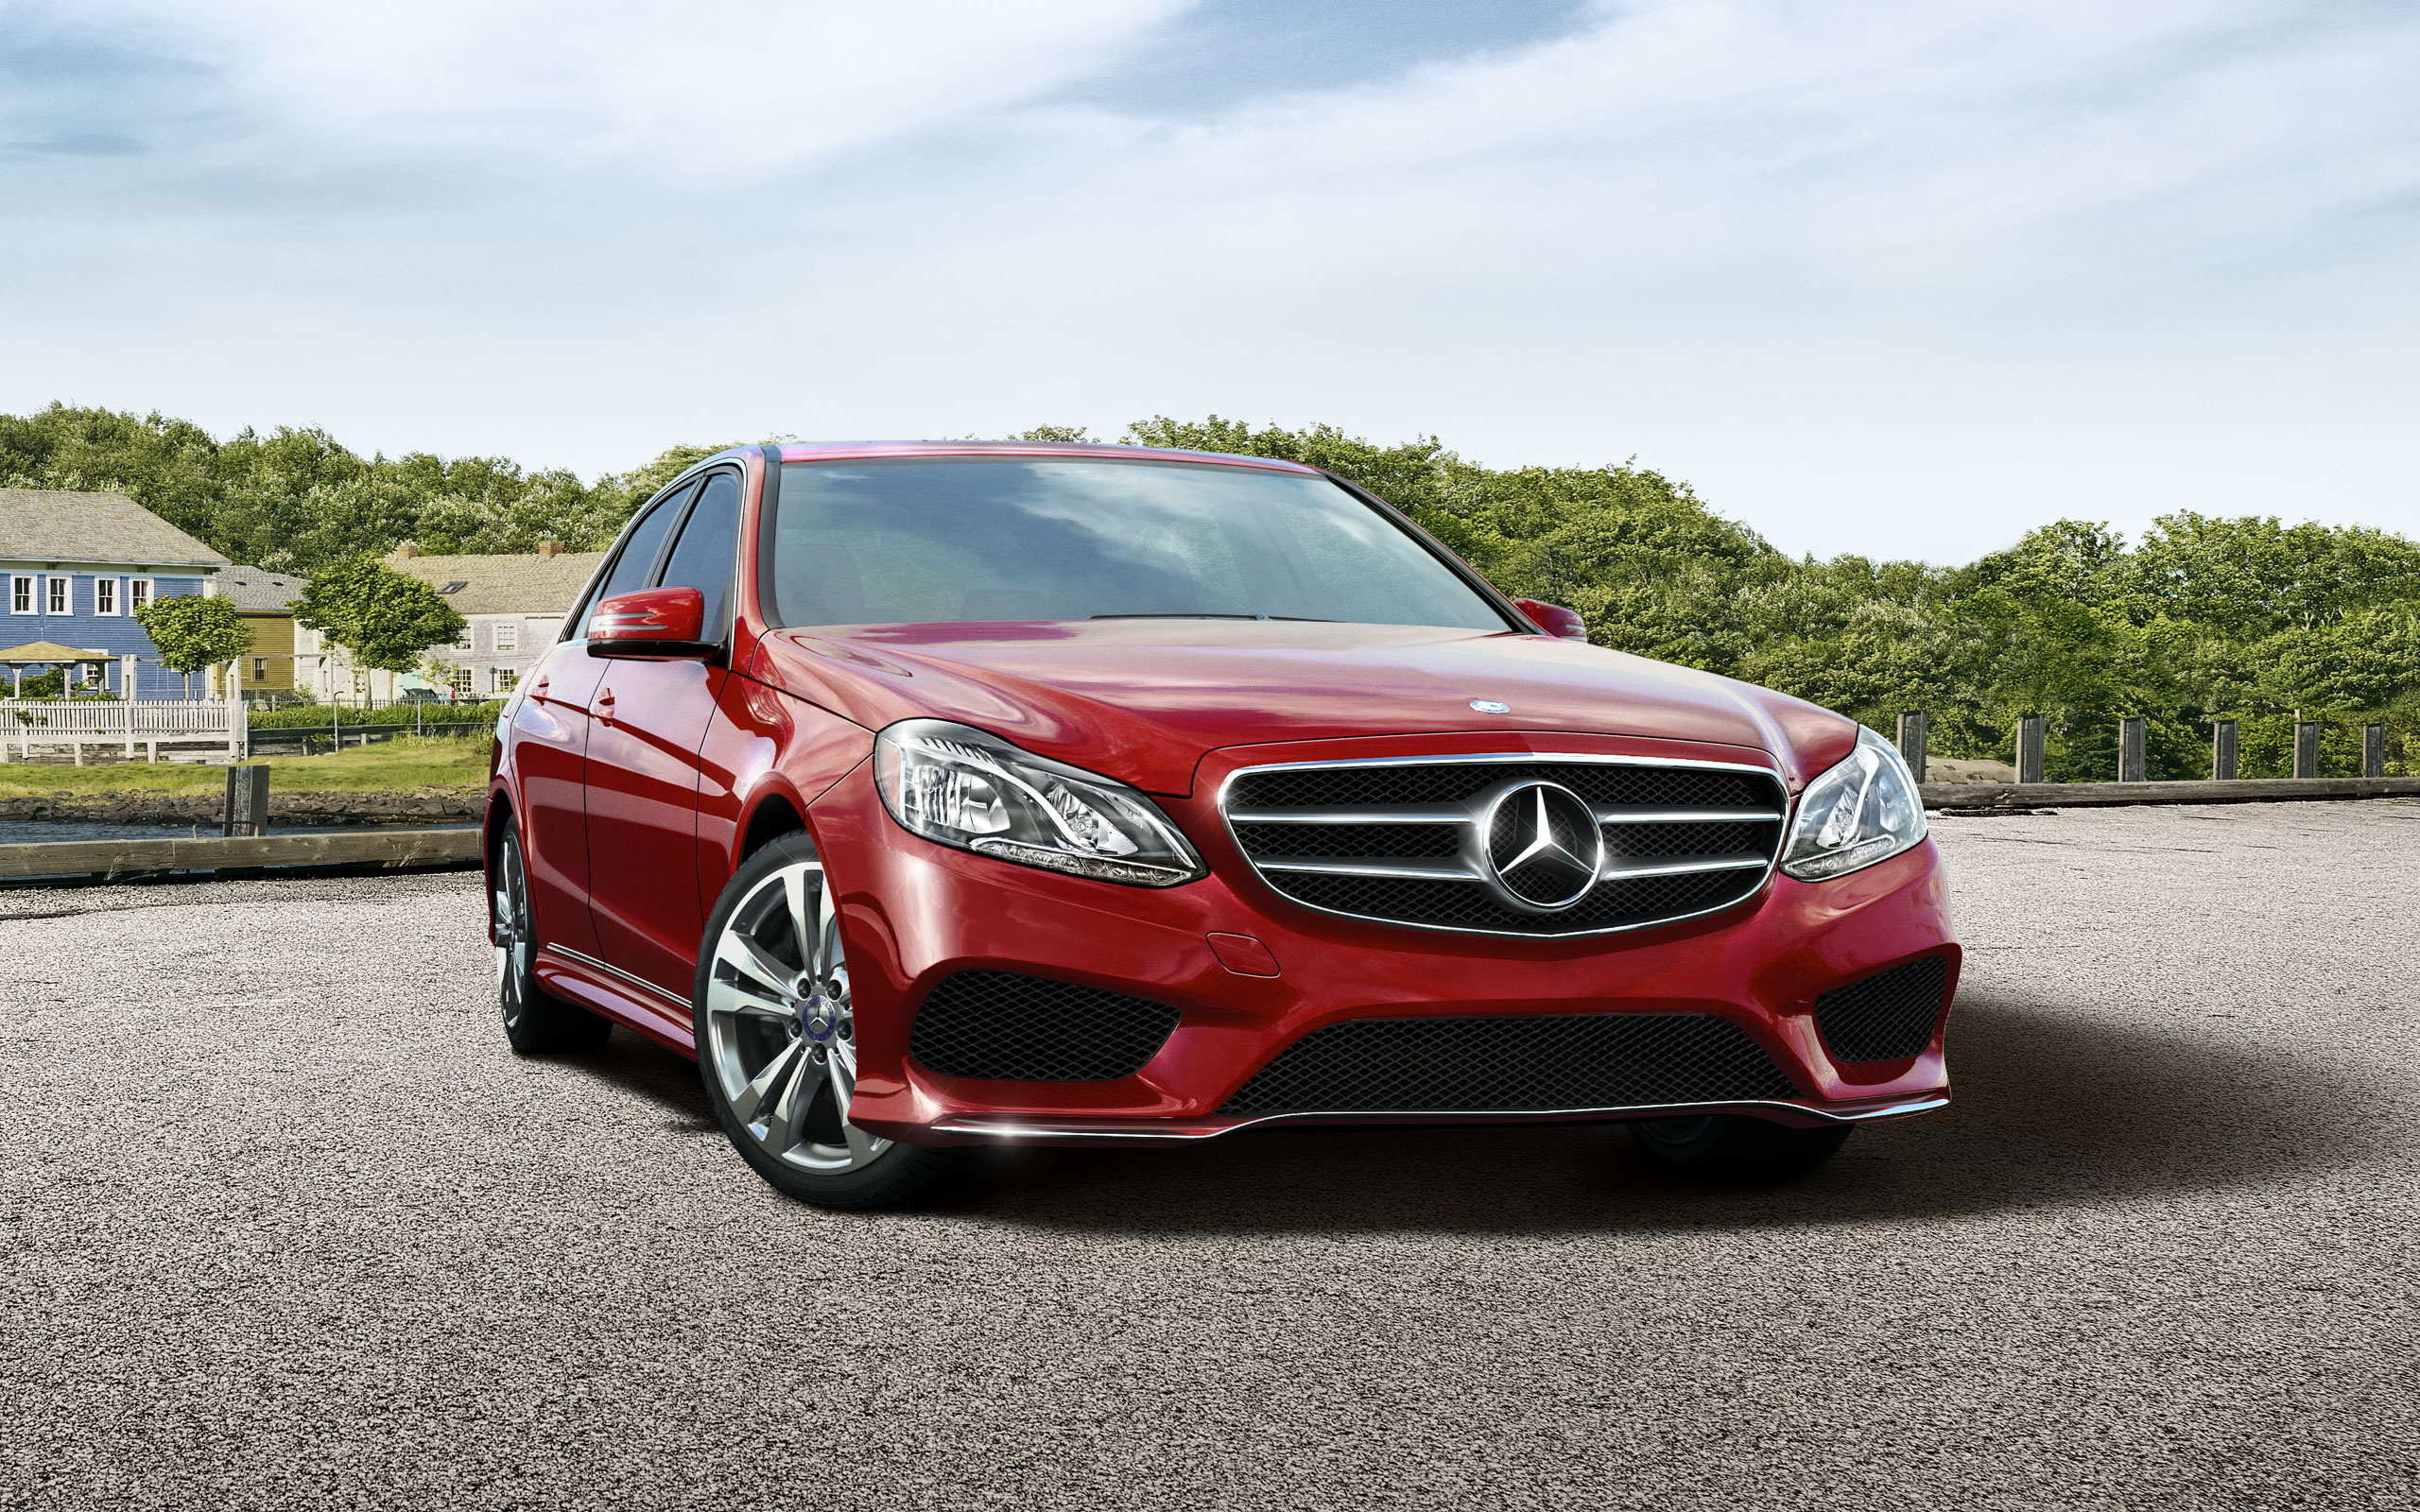 Showroom and Tell: The 2014 Mercedes-Benz E550 4MATIC